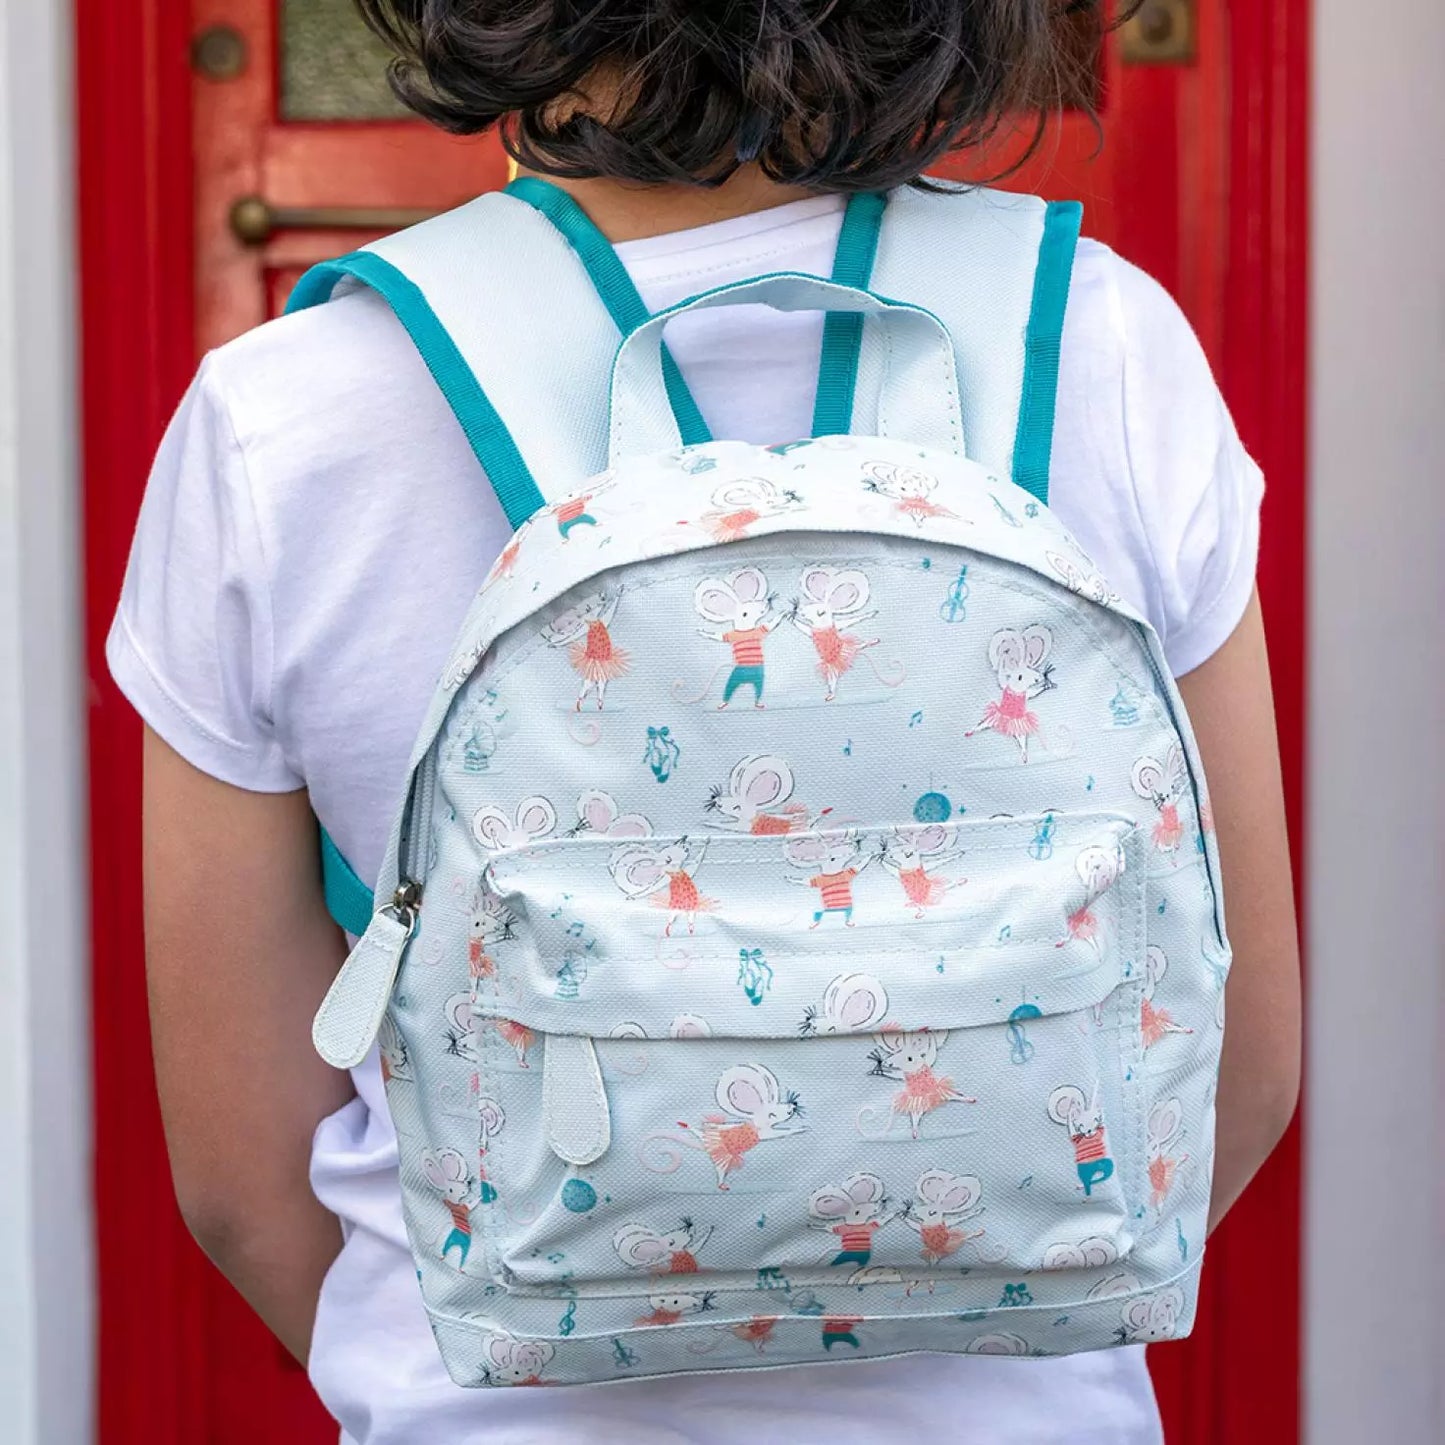 A childs backpack by Rex London, style Mimi and Milo, in blue with multi dancing mice print. Two compartments and zip fastening. Lifestyle image.